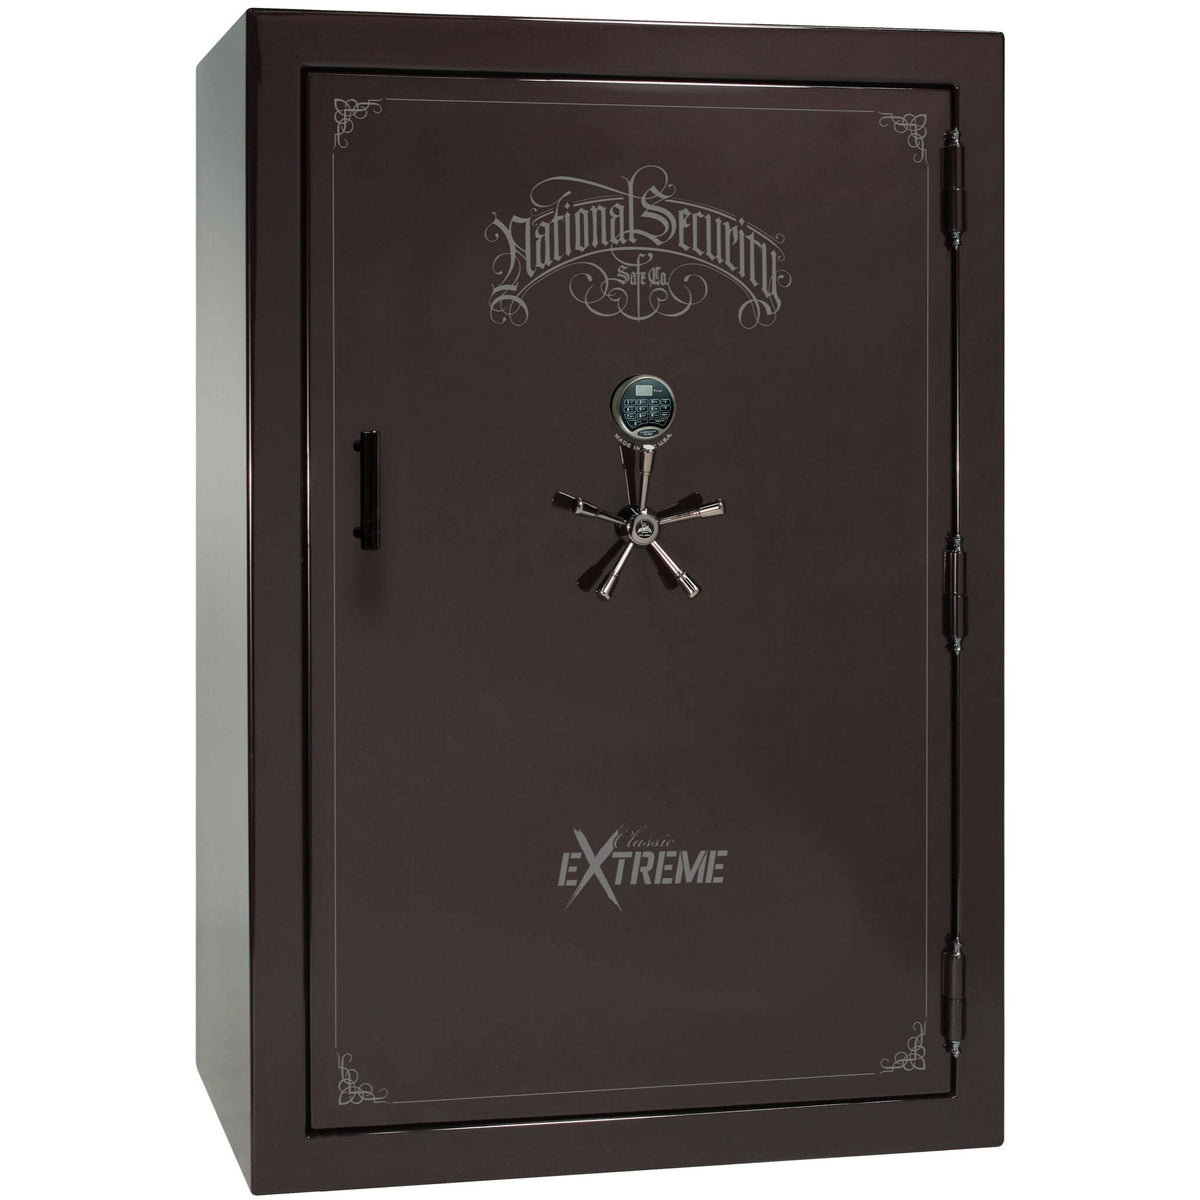 Liberty Classic Select Extreme Wide Body Safe in Black Cherry Gloss with Black Chrome Electronic Lock.